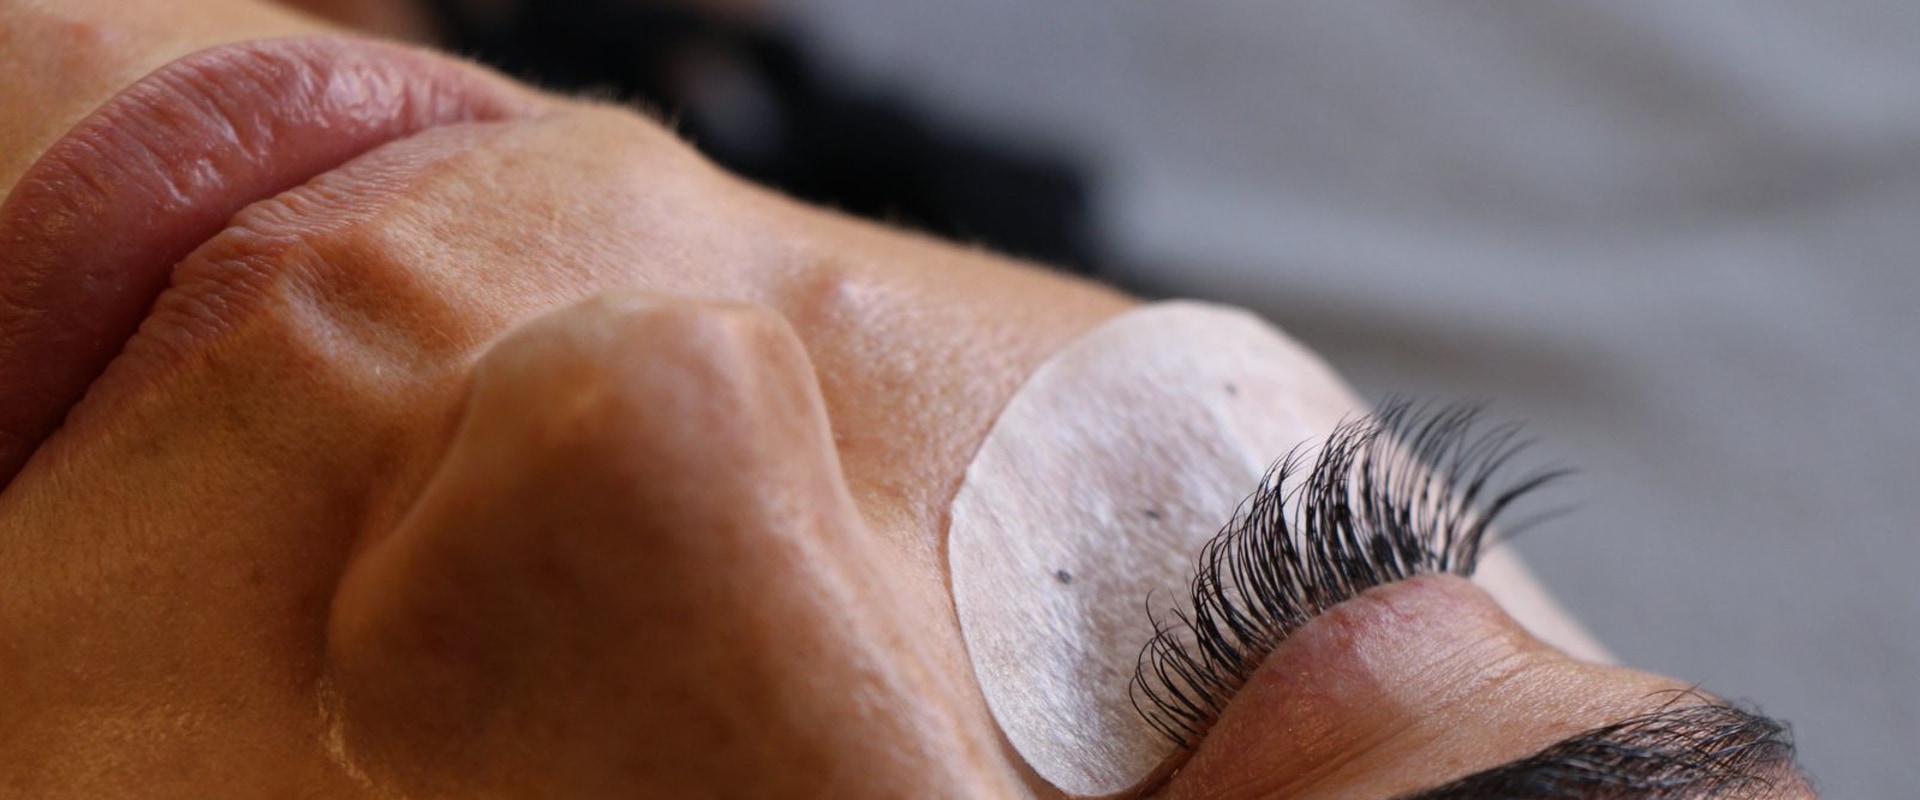 What type of business is lash extensions?